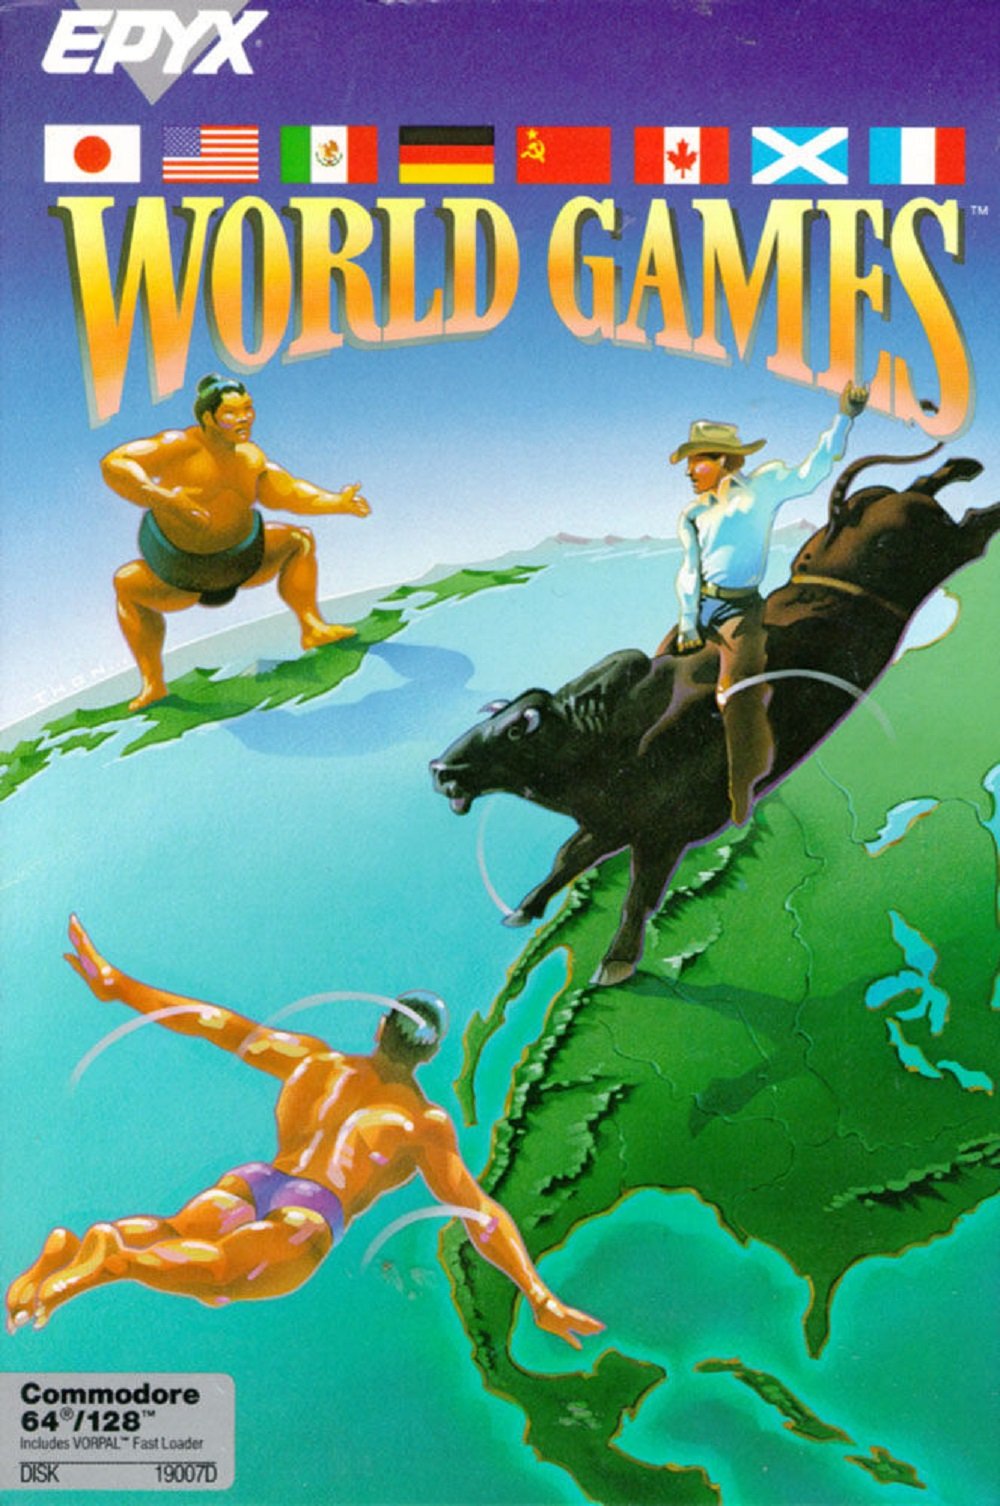 Image of World Games